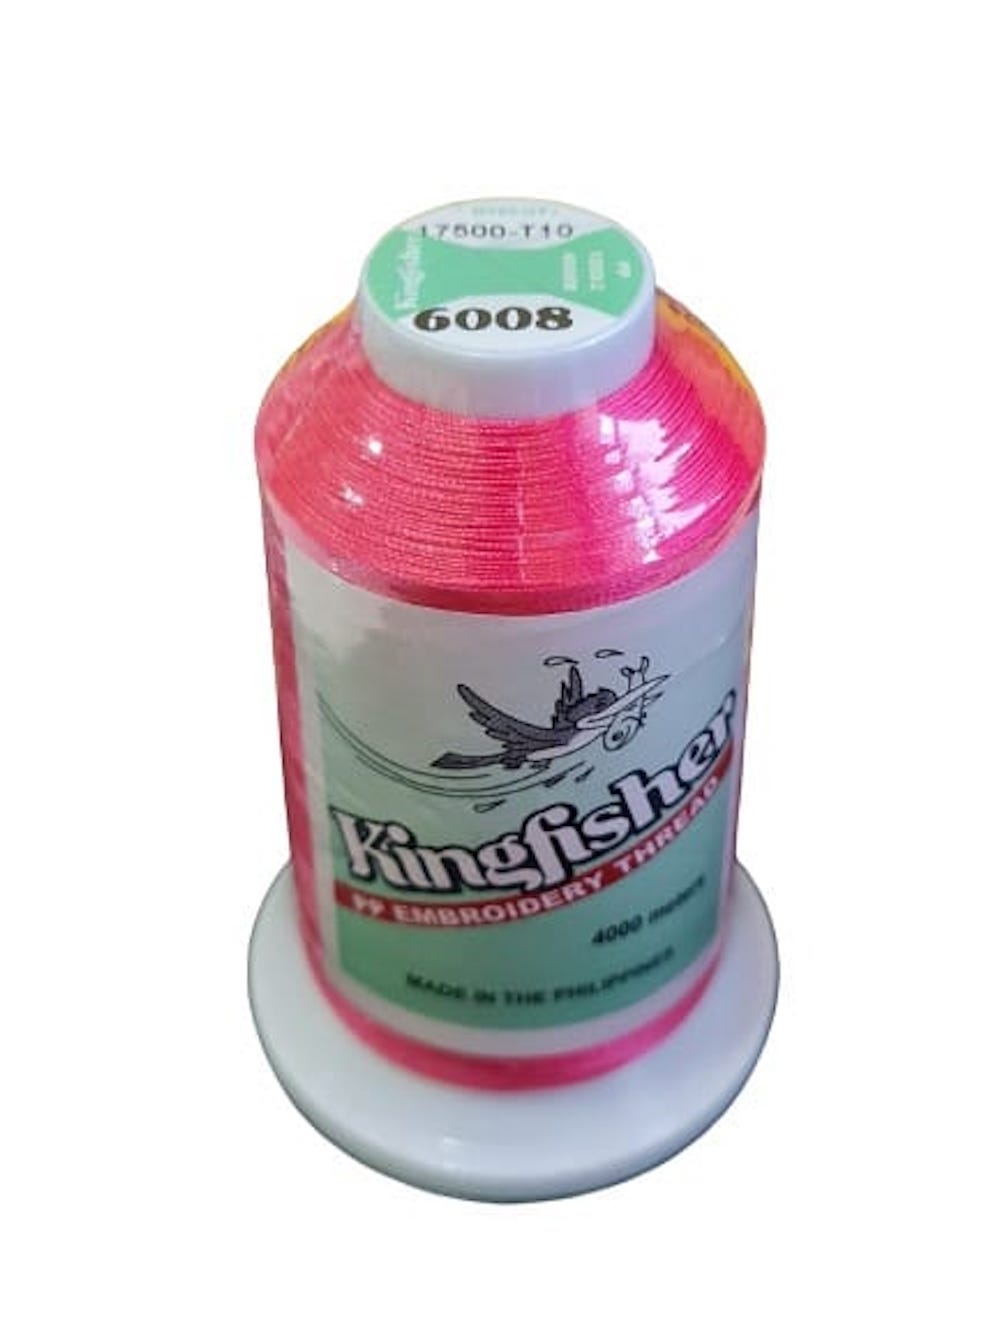 King Fisher Embroidery Thread 4000m 6008 - MY SEWING MALL